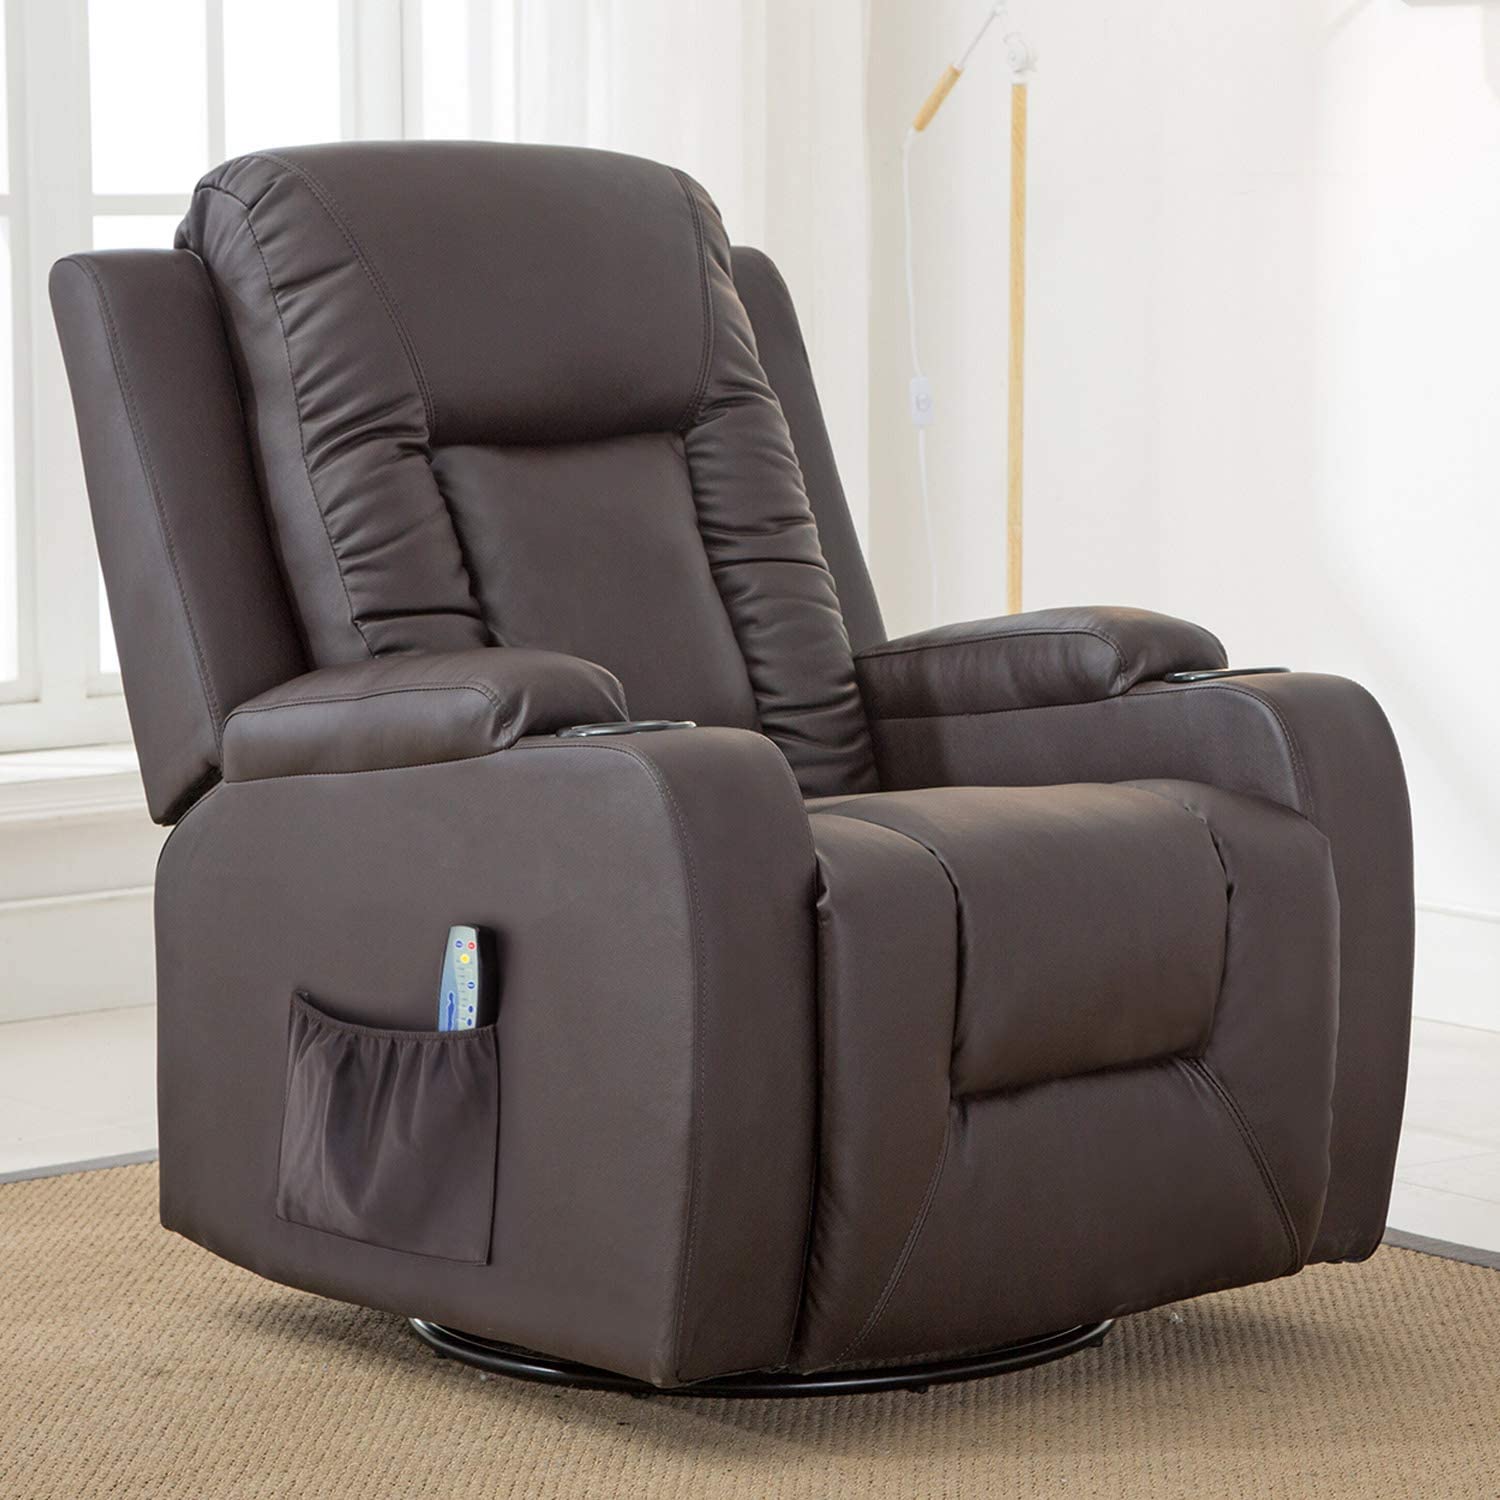 <strong>9. Comhoma Leather Recliner Chair Modern Rocker</strong>